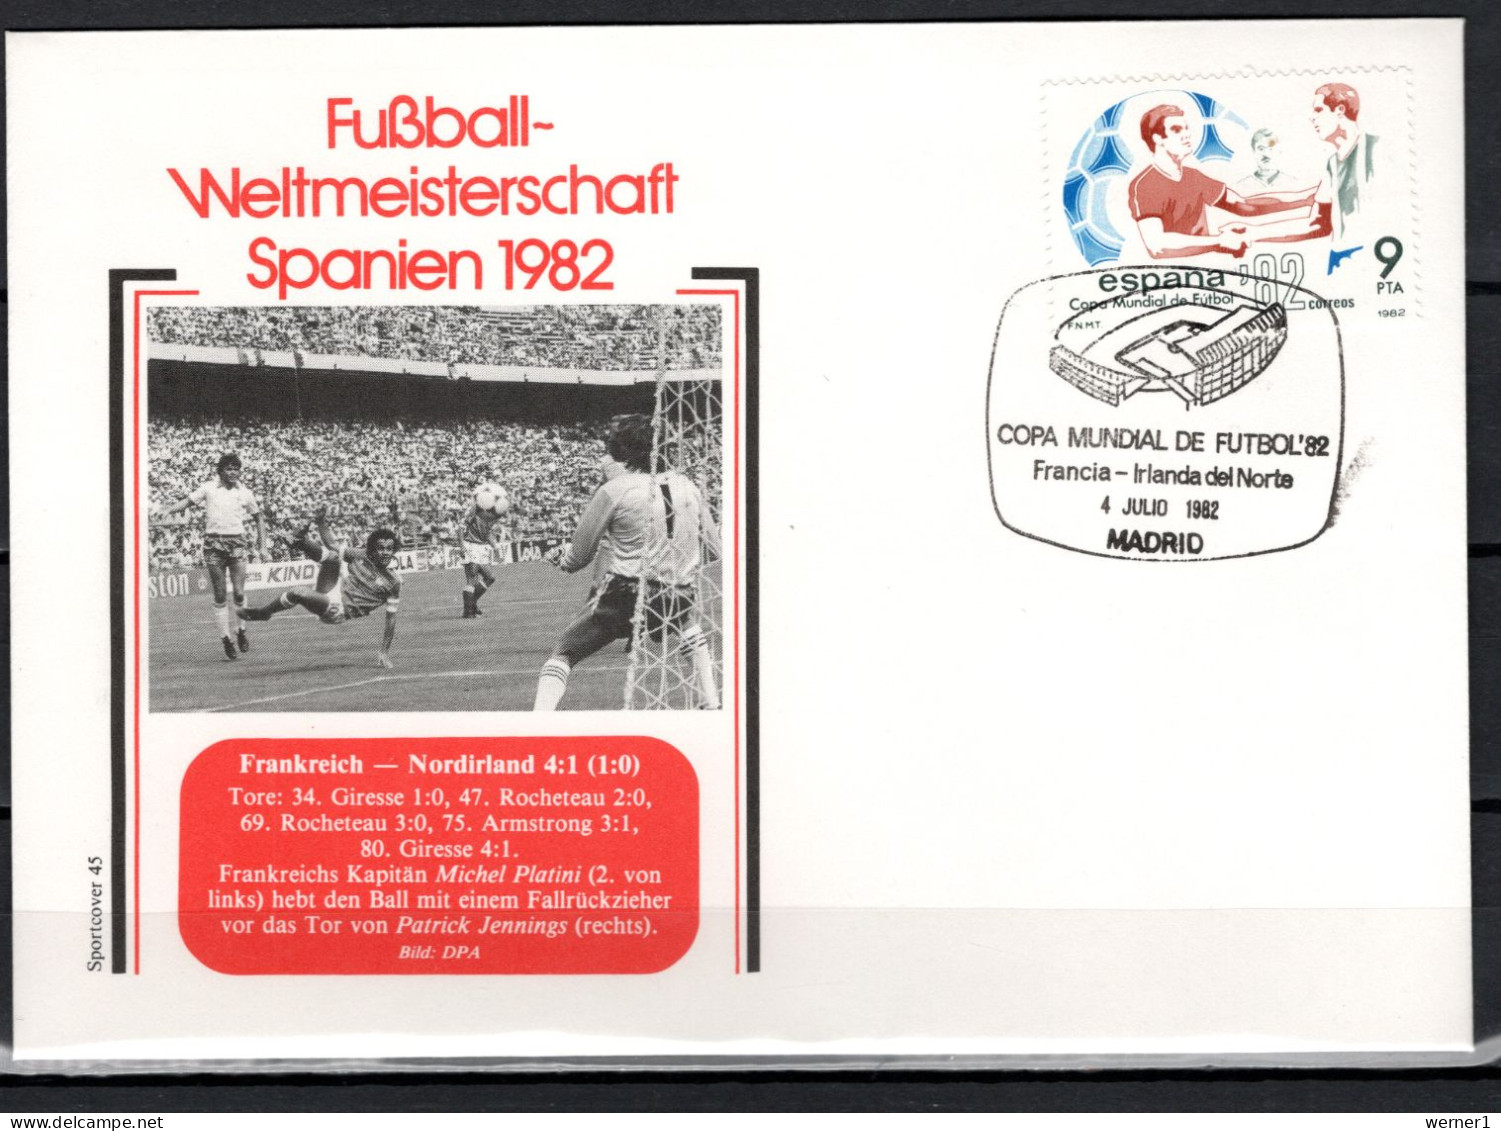 Spain 1982 Football Soccer World Cup Commemorative Cover Match France - Northern Ireland 4:1 - 1982 – Spain